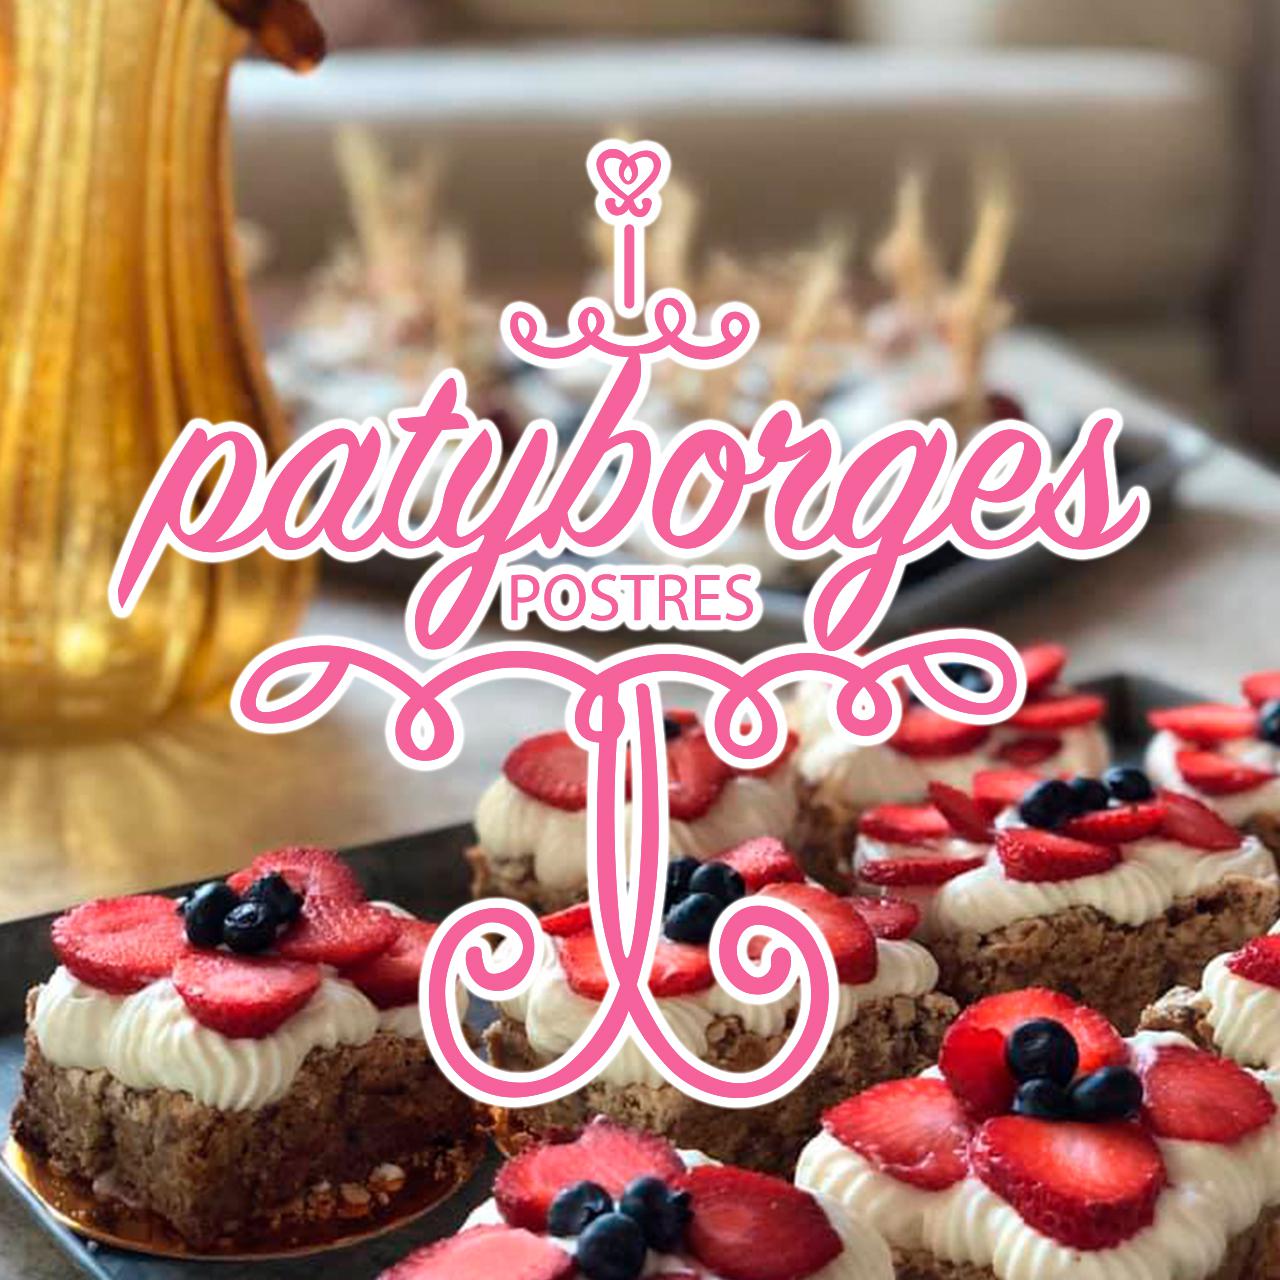 Paty Borges Postres